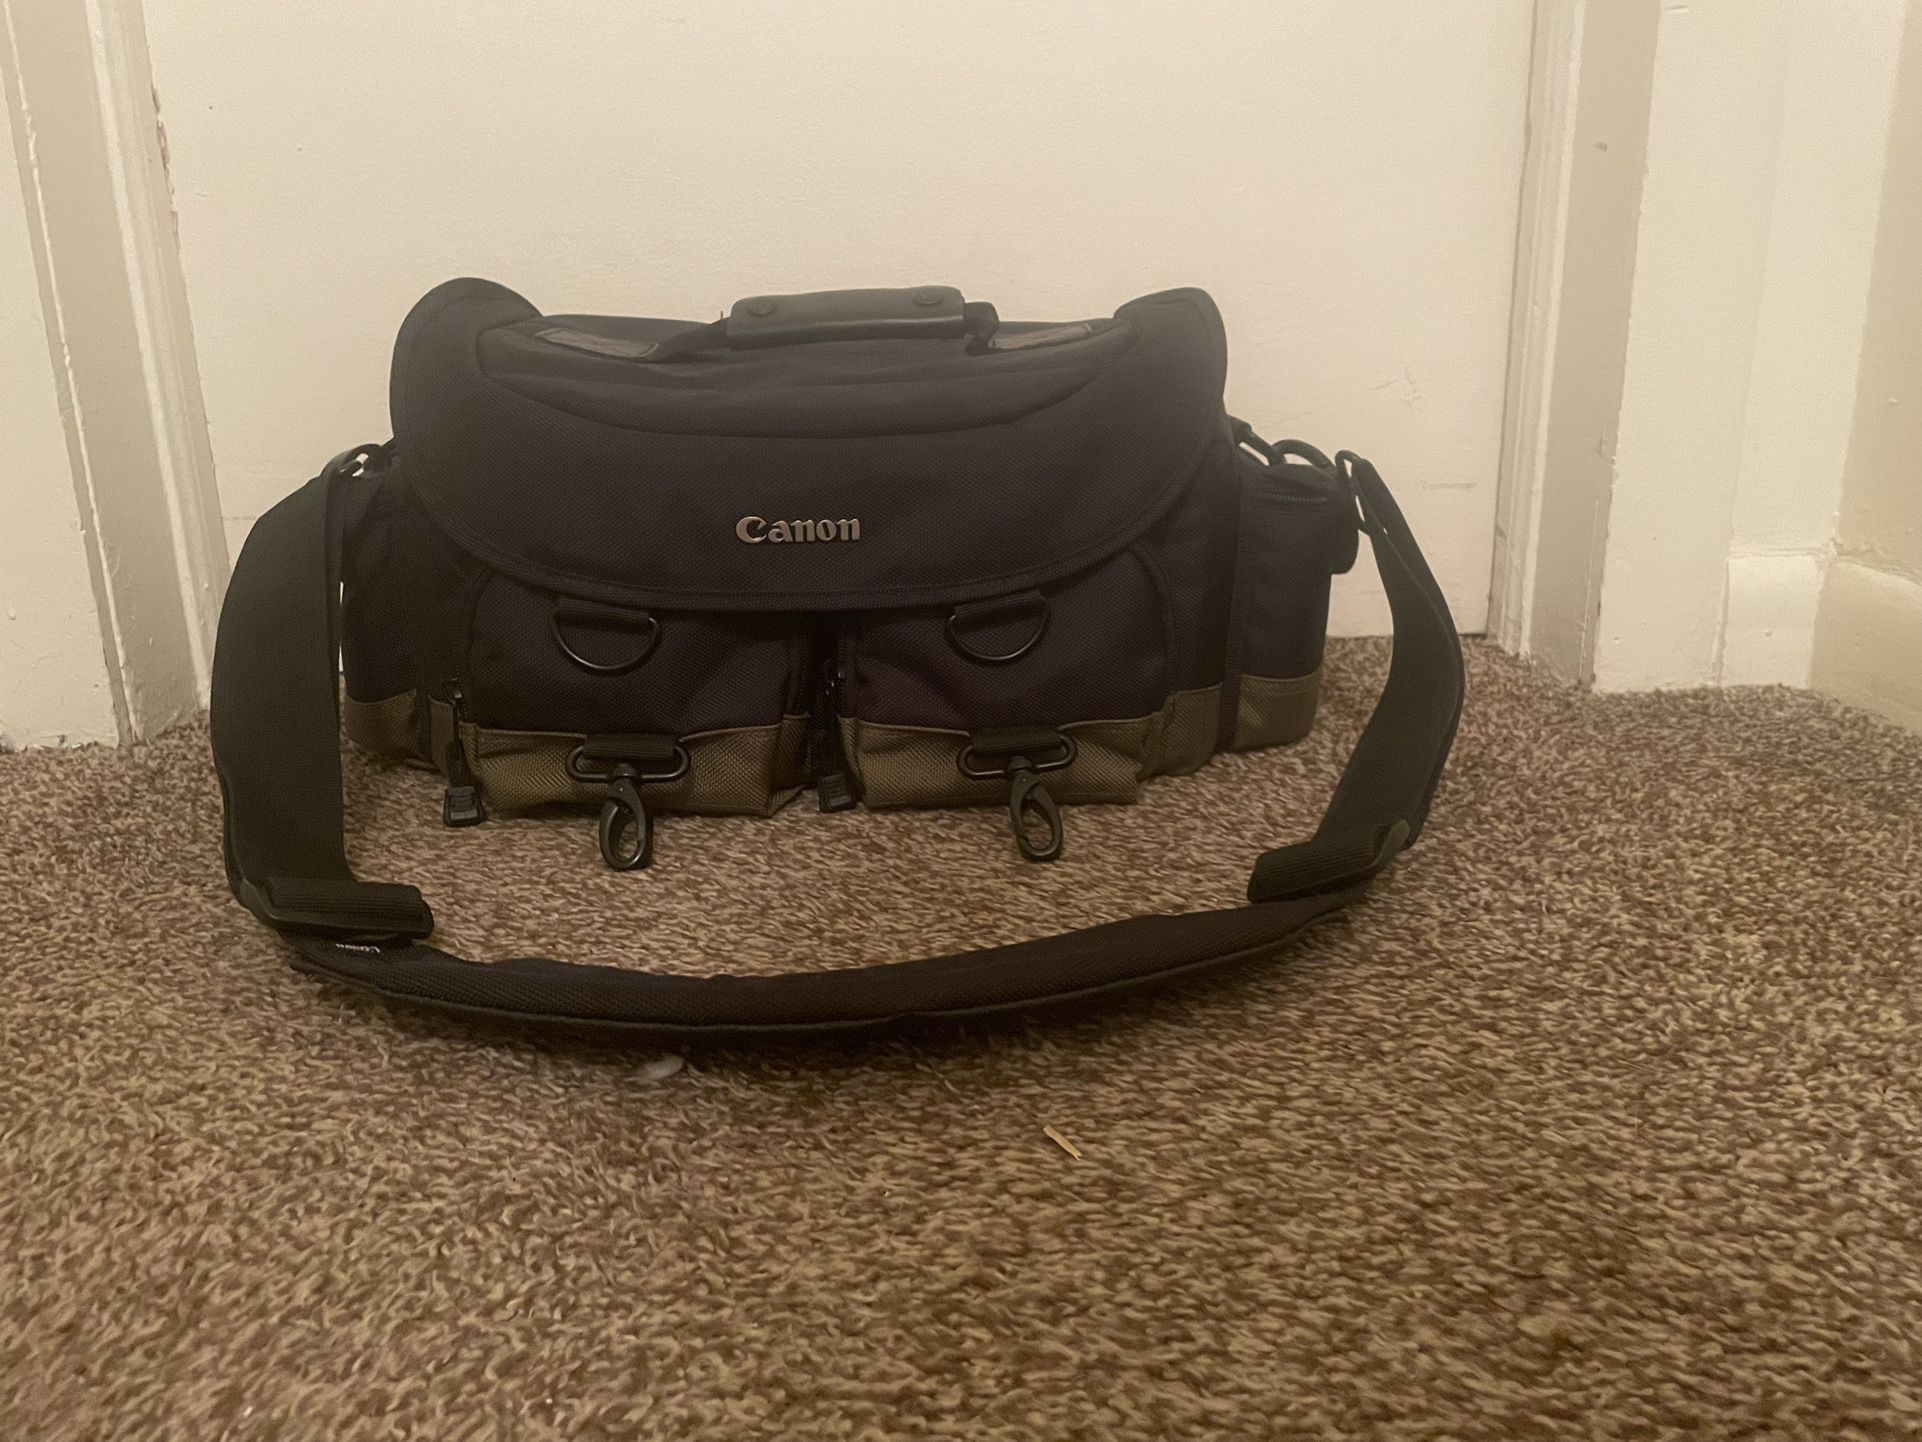 Canon Photography Equipment Bags